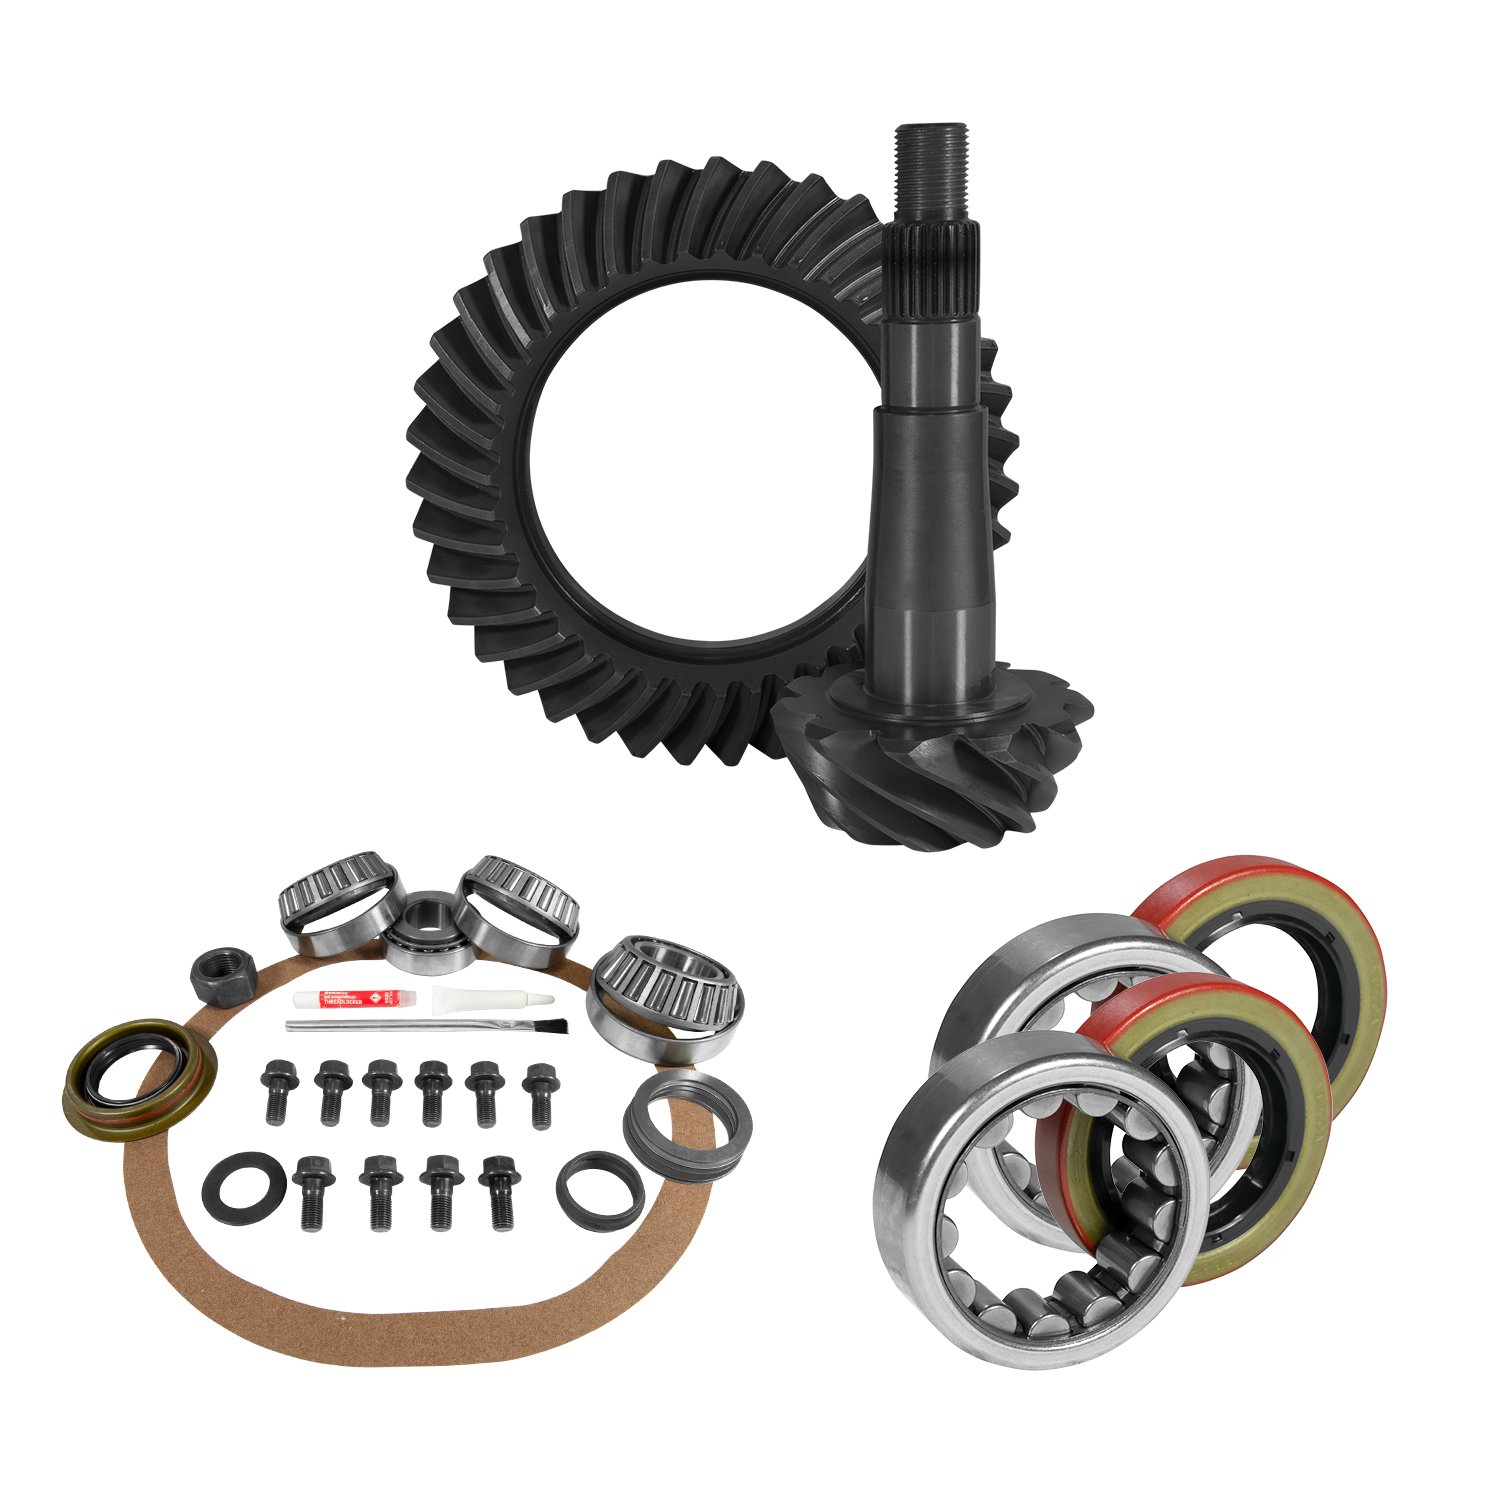 USA Standard 10902 8.25 in. Chy 4.11 Rear Ring & Pinion Install Kit, 1.618 in. Id Axle Bearings & Seals